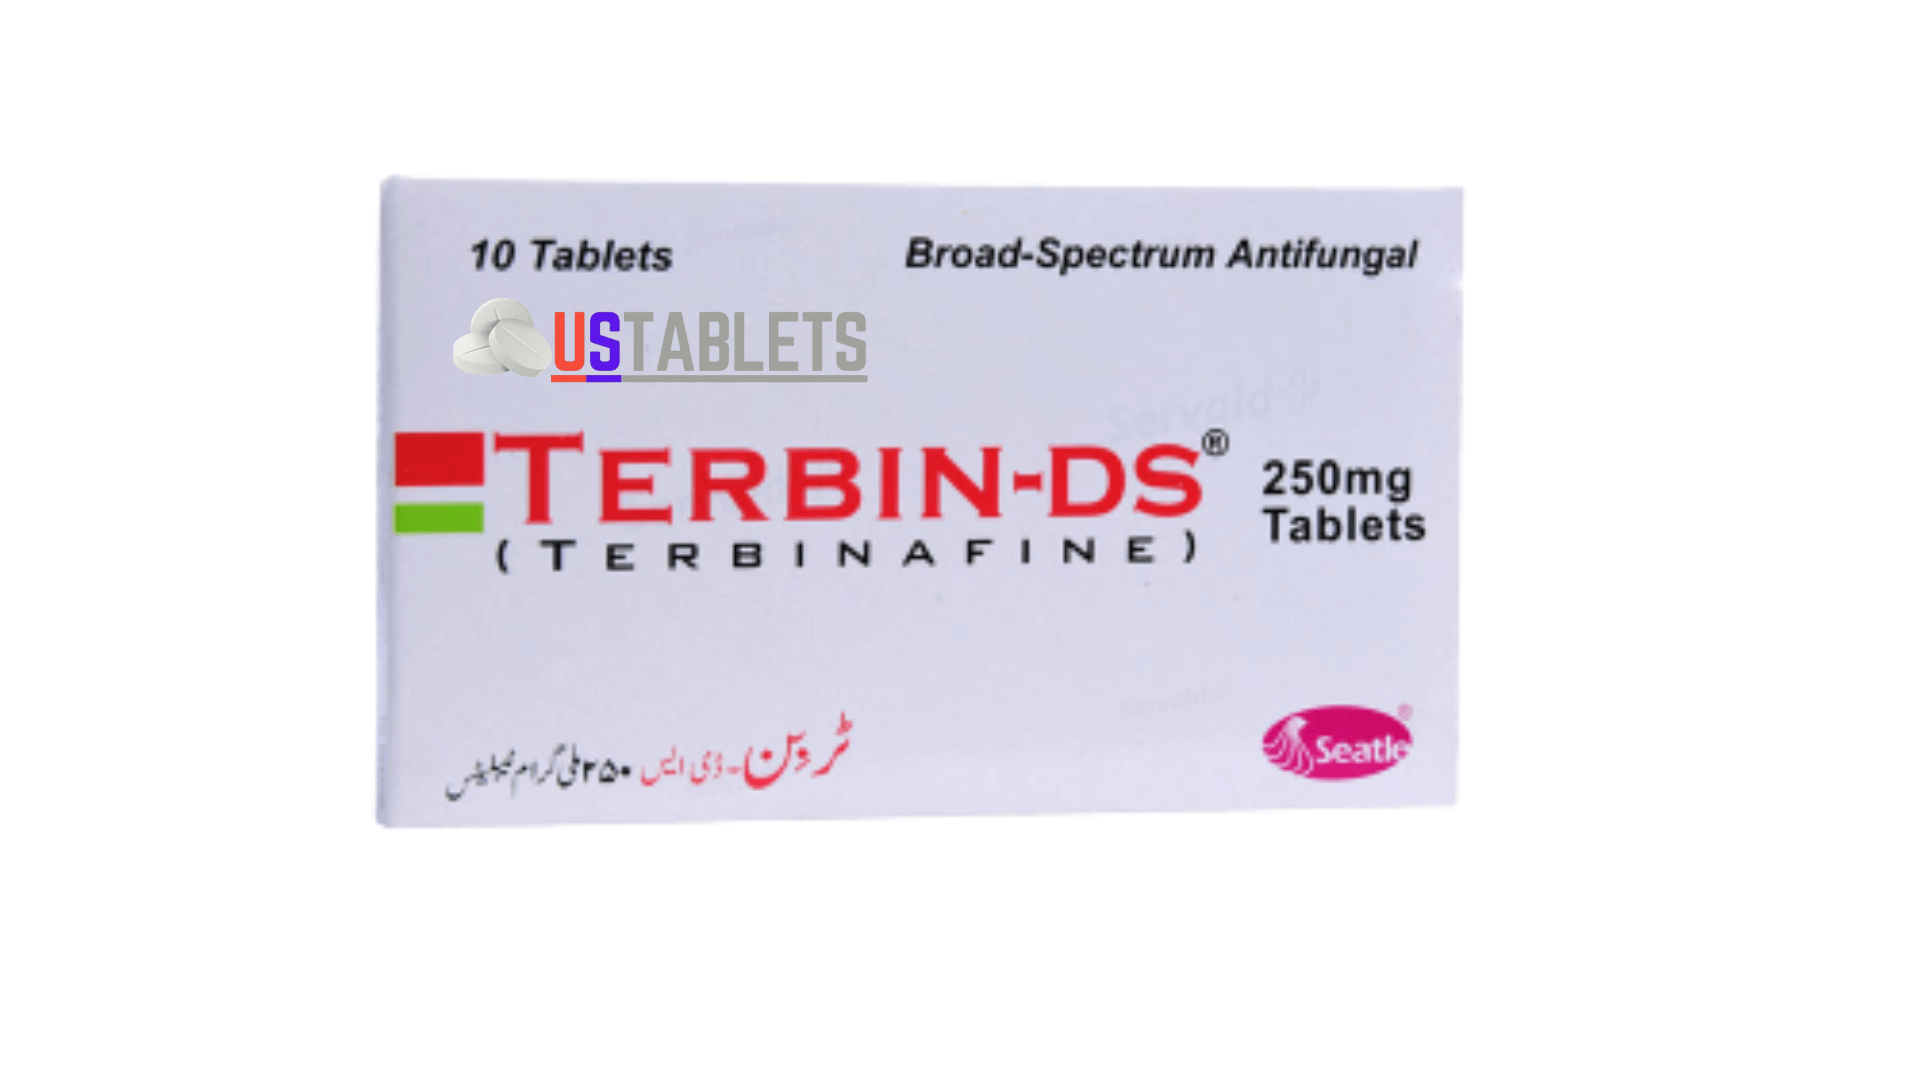 Terbin-Ds Tablet 250mg I Uses, Side Effects, Price & Availability